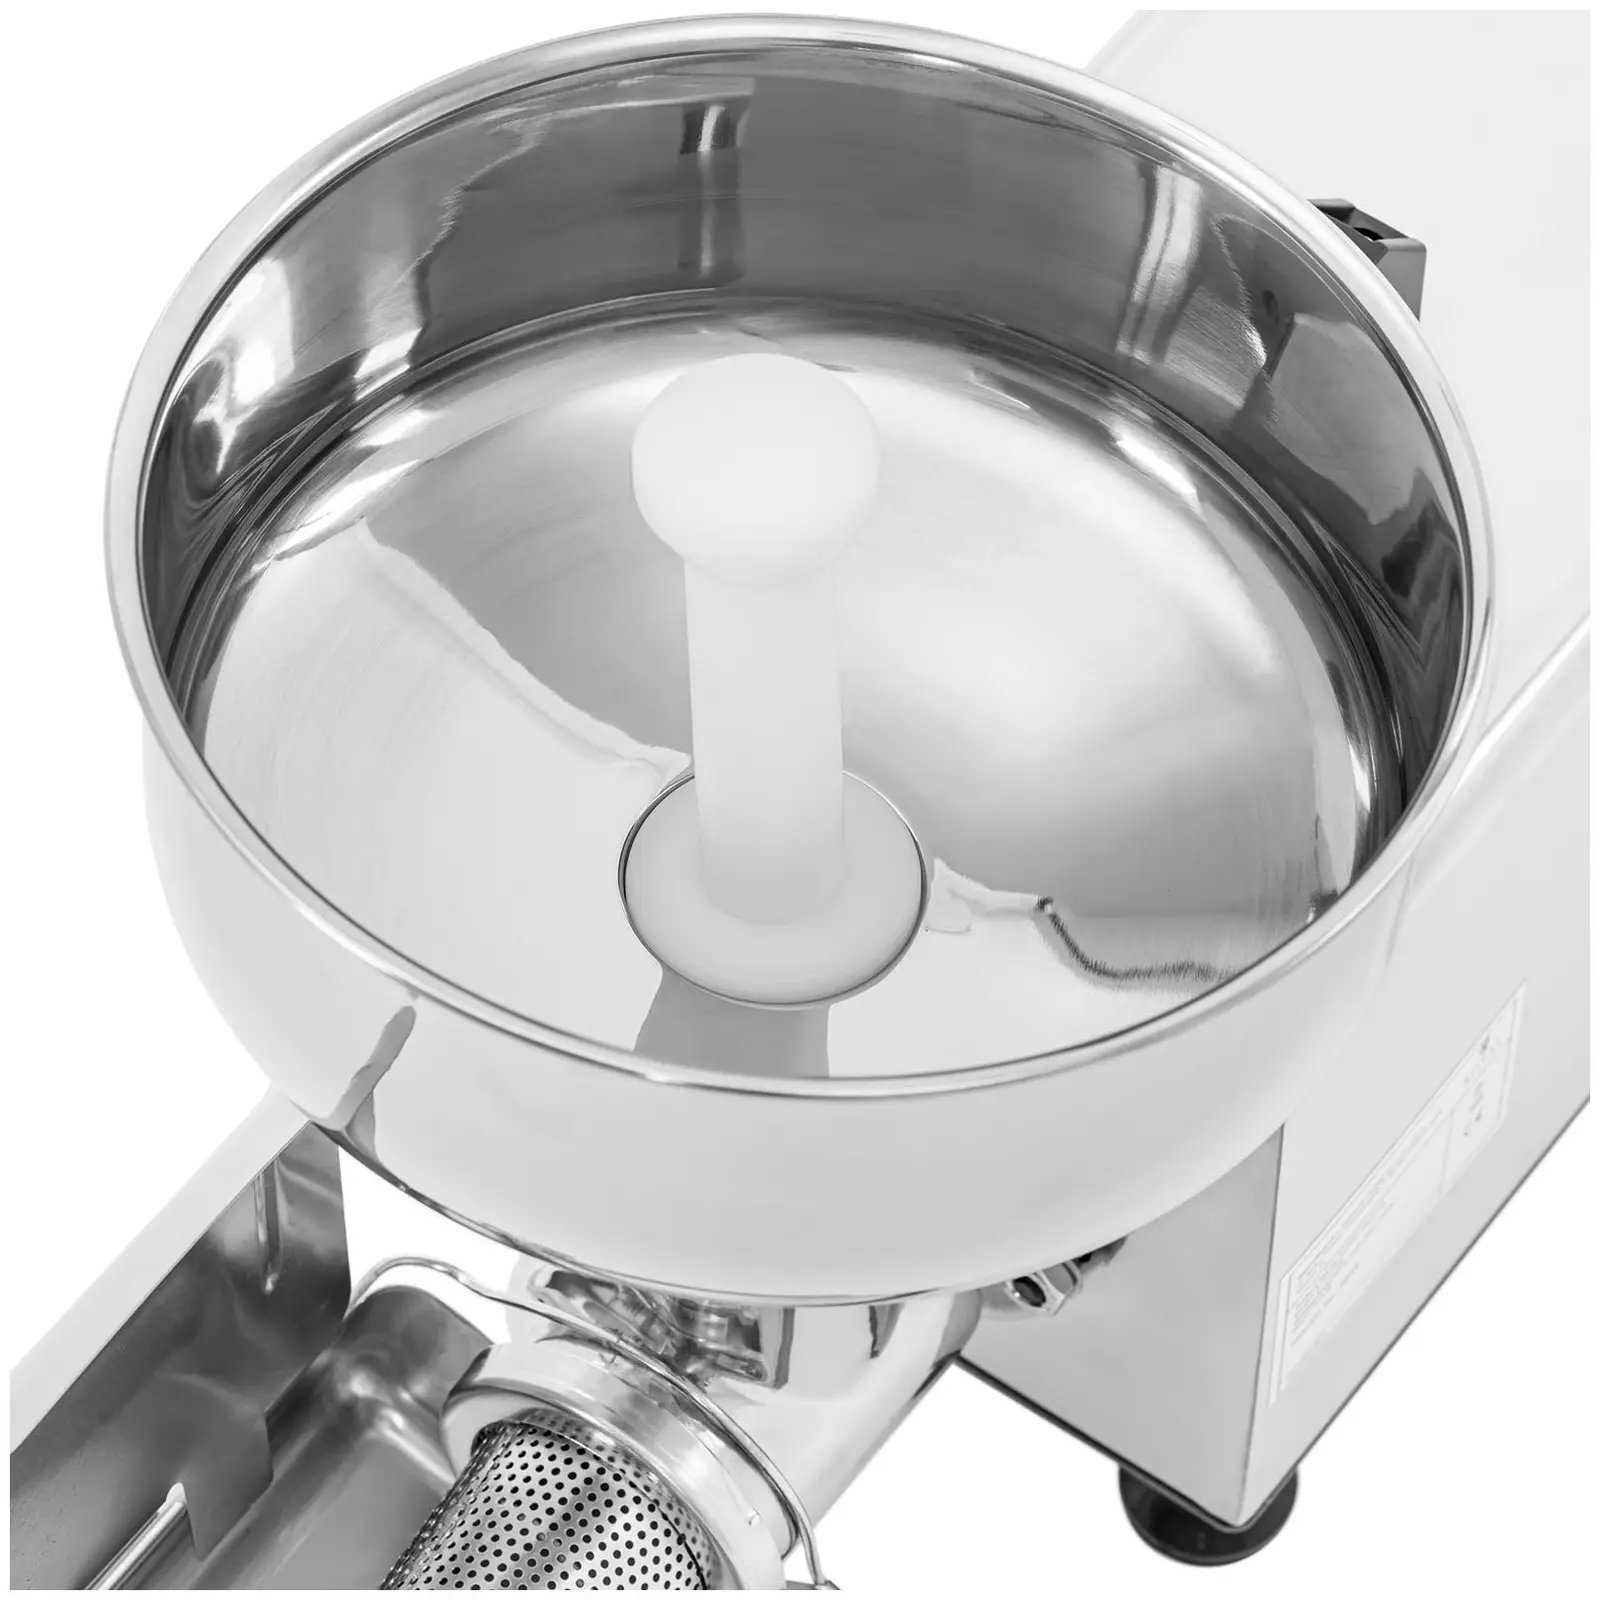 Electric tomato press - 450 W - 80 rpm - Stainless steel - Cover with handle - Royal Catering